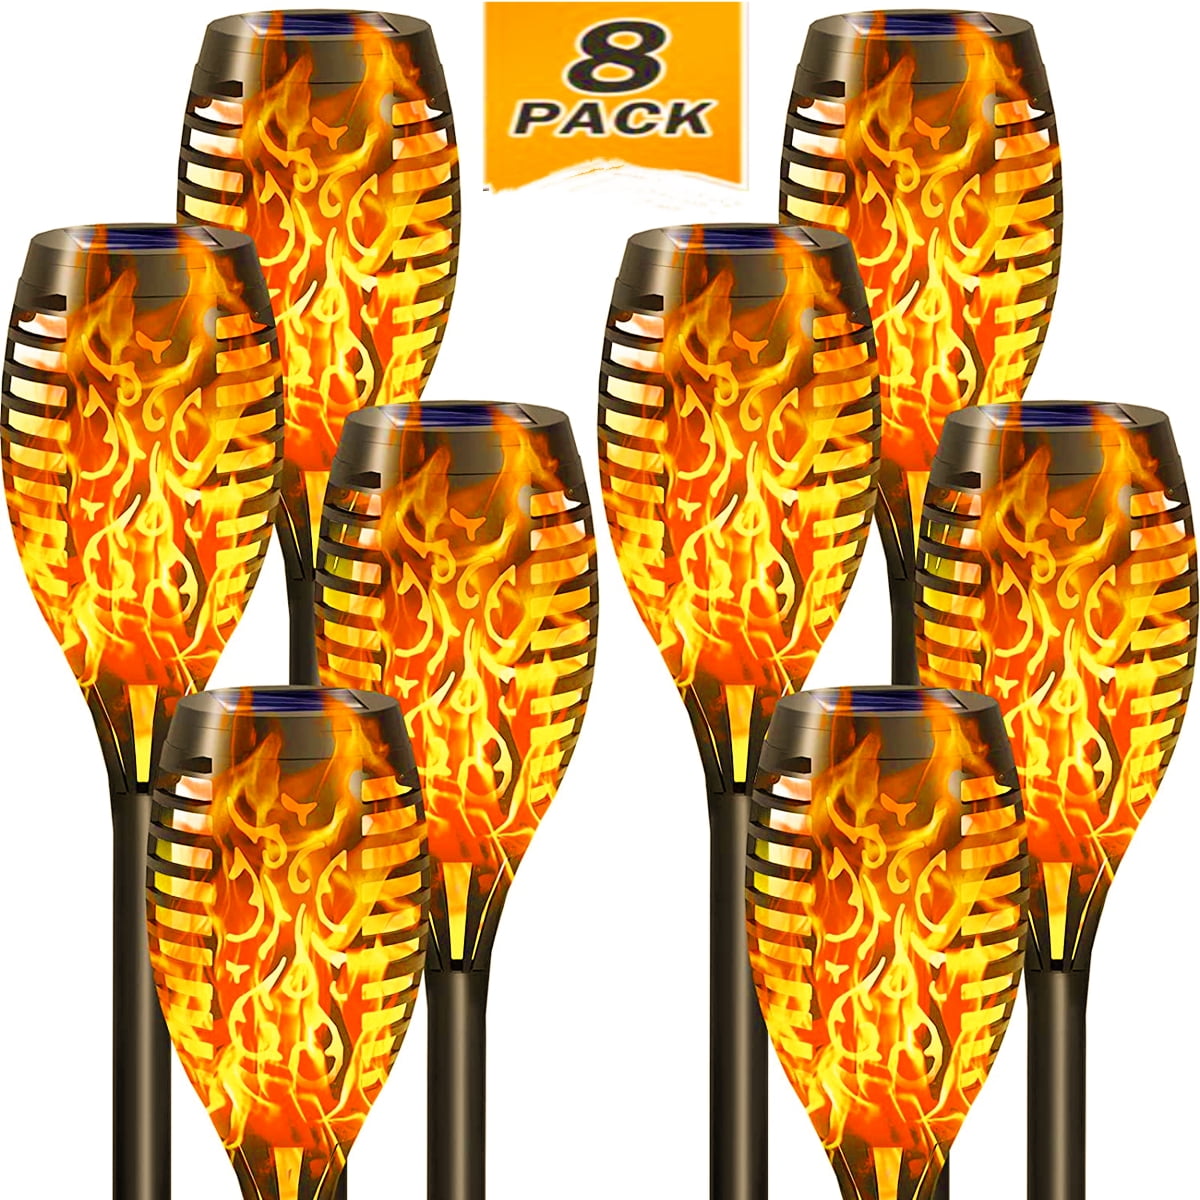 20 Inch Landscape Tiki Torches for Garden Yard Pathway Patio Size : 4 Pack SKYWPOJU Solar Torch Lights with Flickering Flame Garden Decor